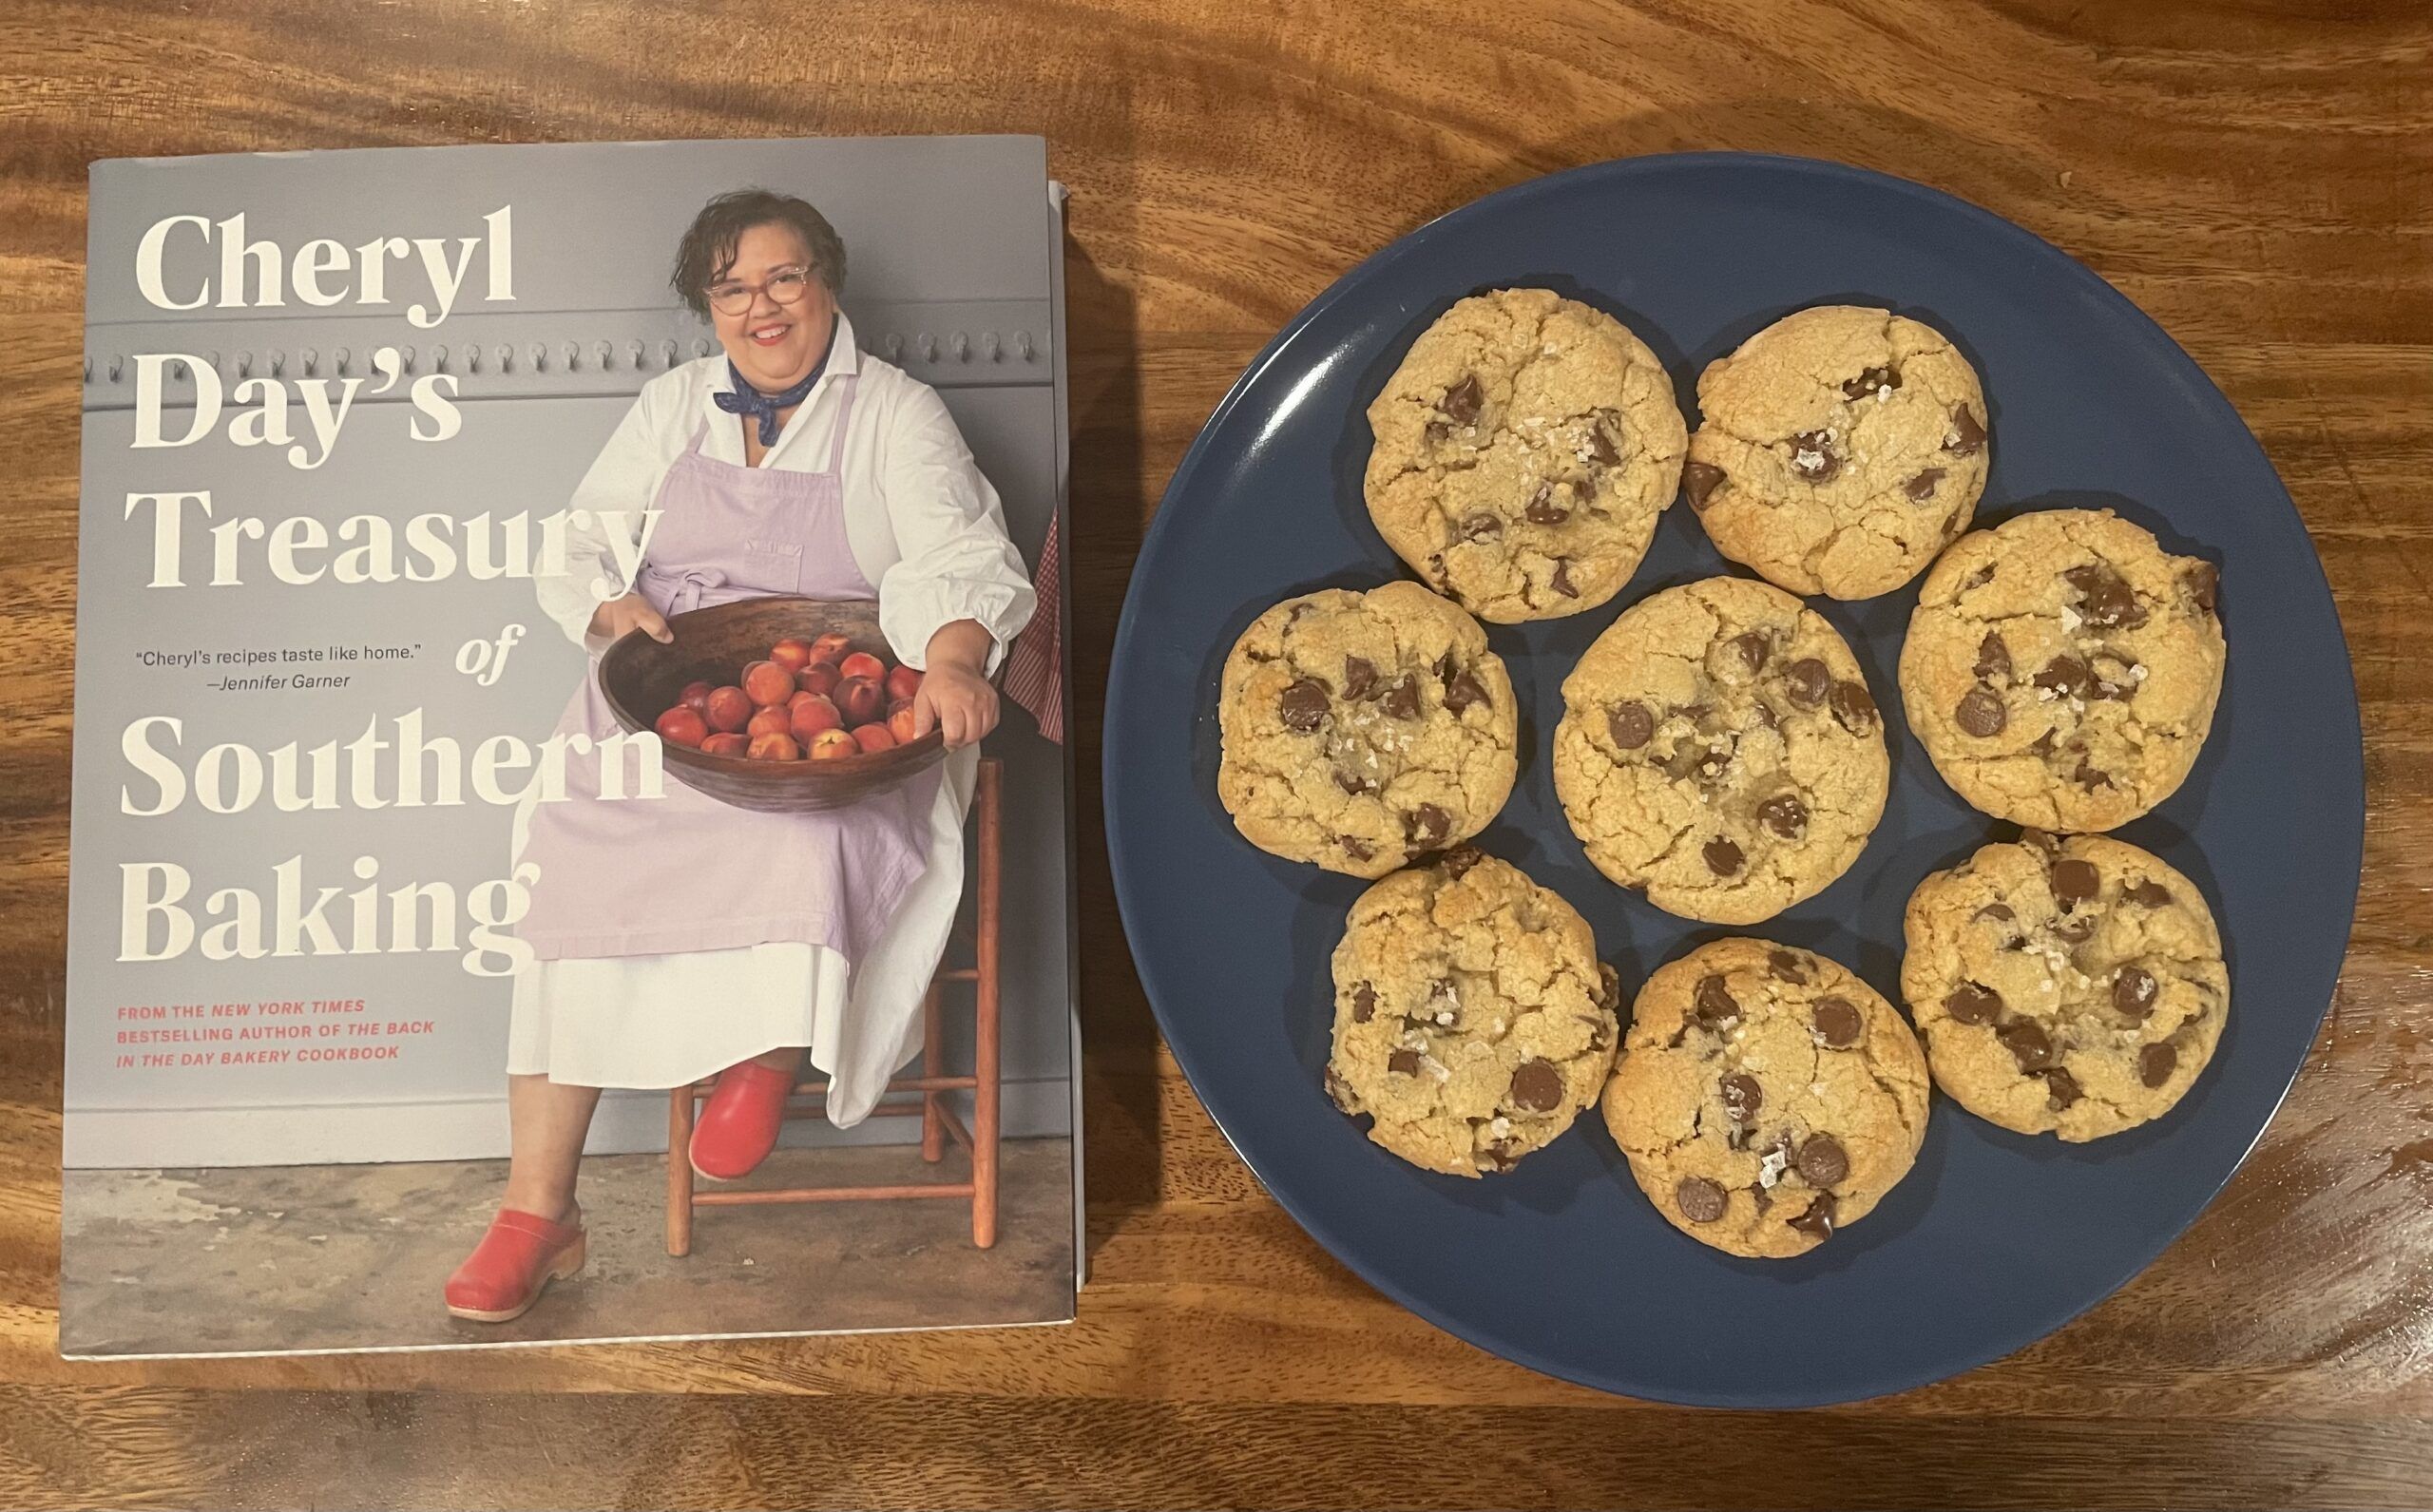 Cheryl Day's Treasury of Southern Baking cookbook on a wooden table next to a plate of classic looking chocolate chip cookies sprinkled with flaky salt.